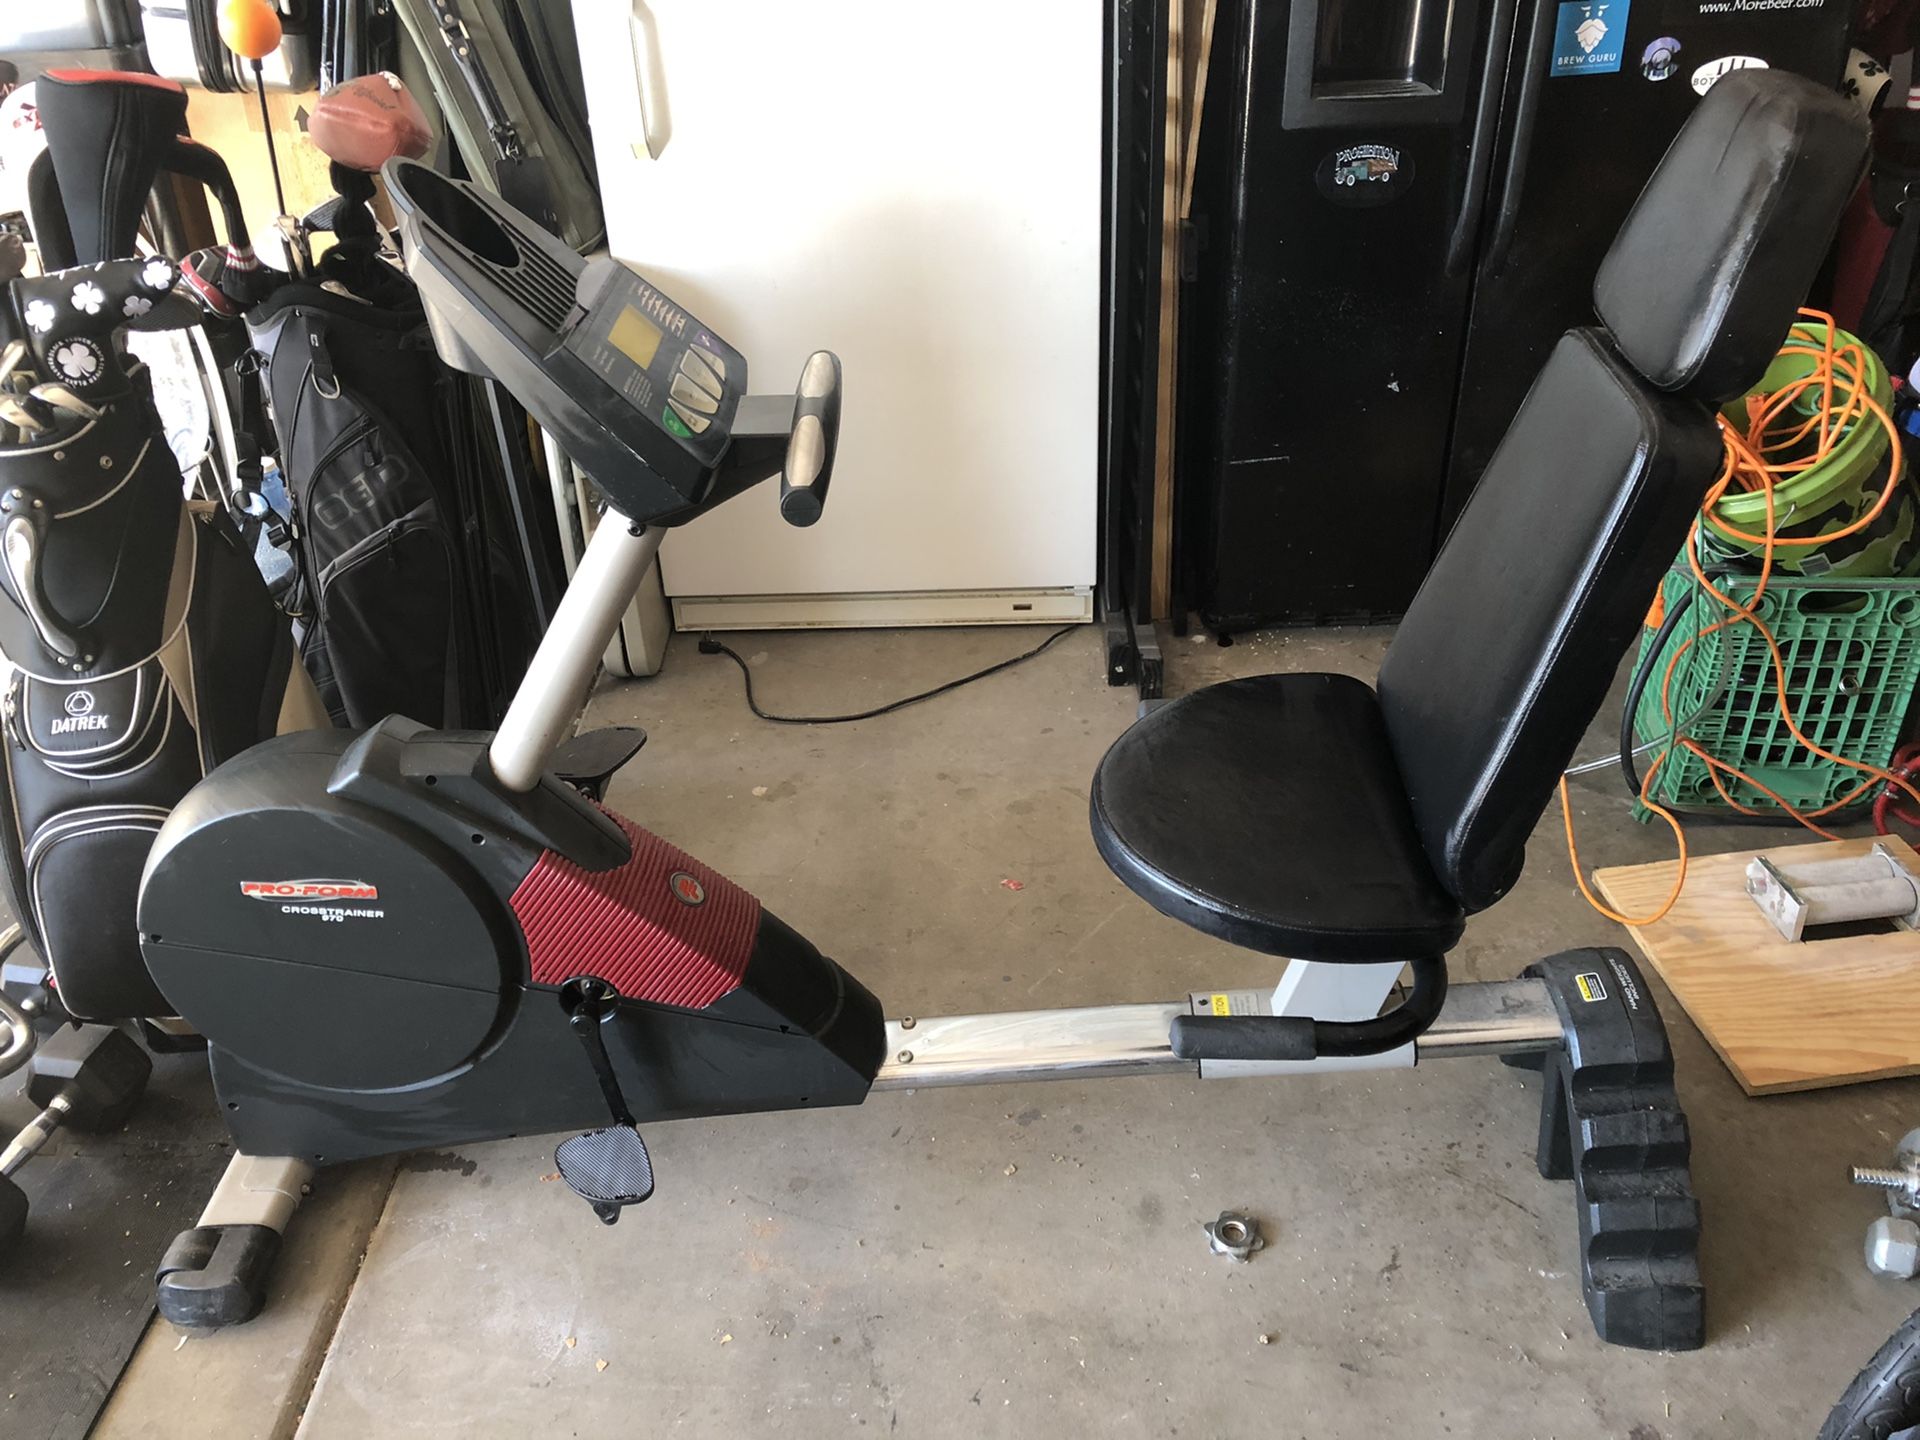 Proform Cross Trainer 970 Exercise Bike and Weight Bench